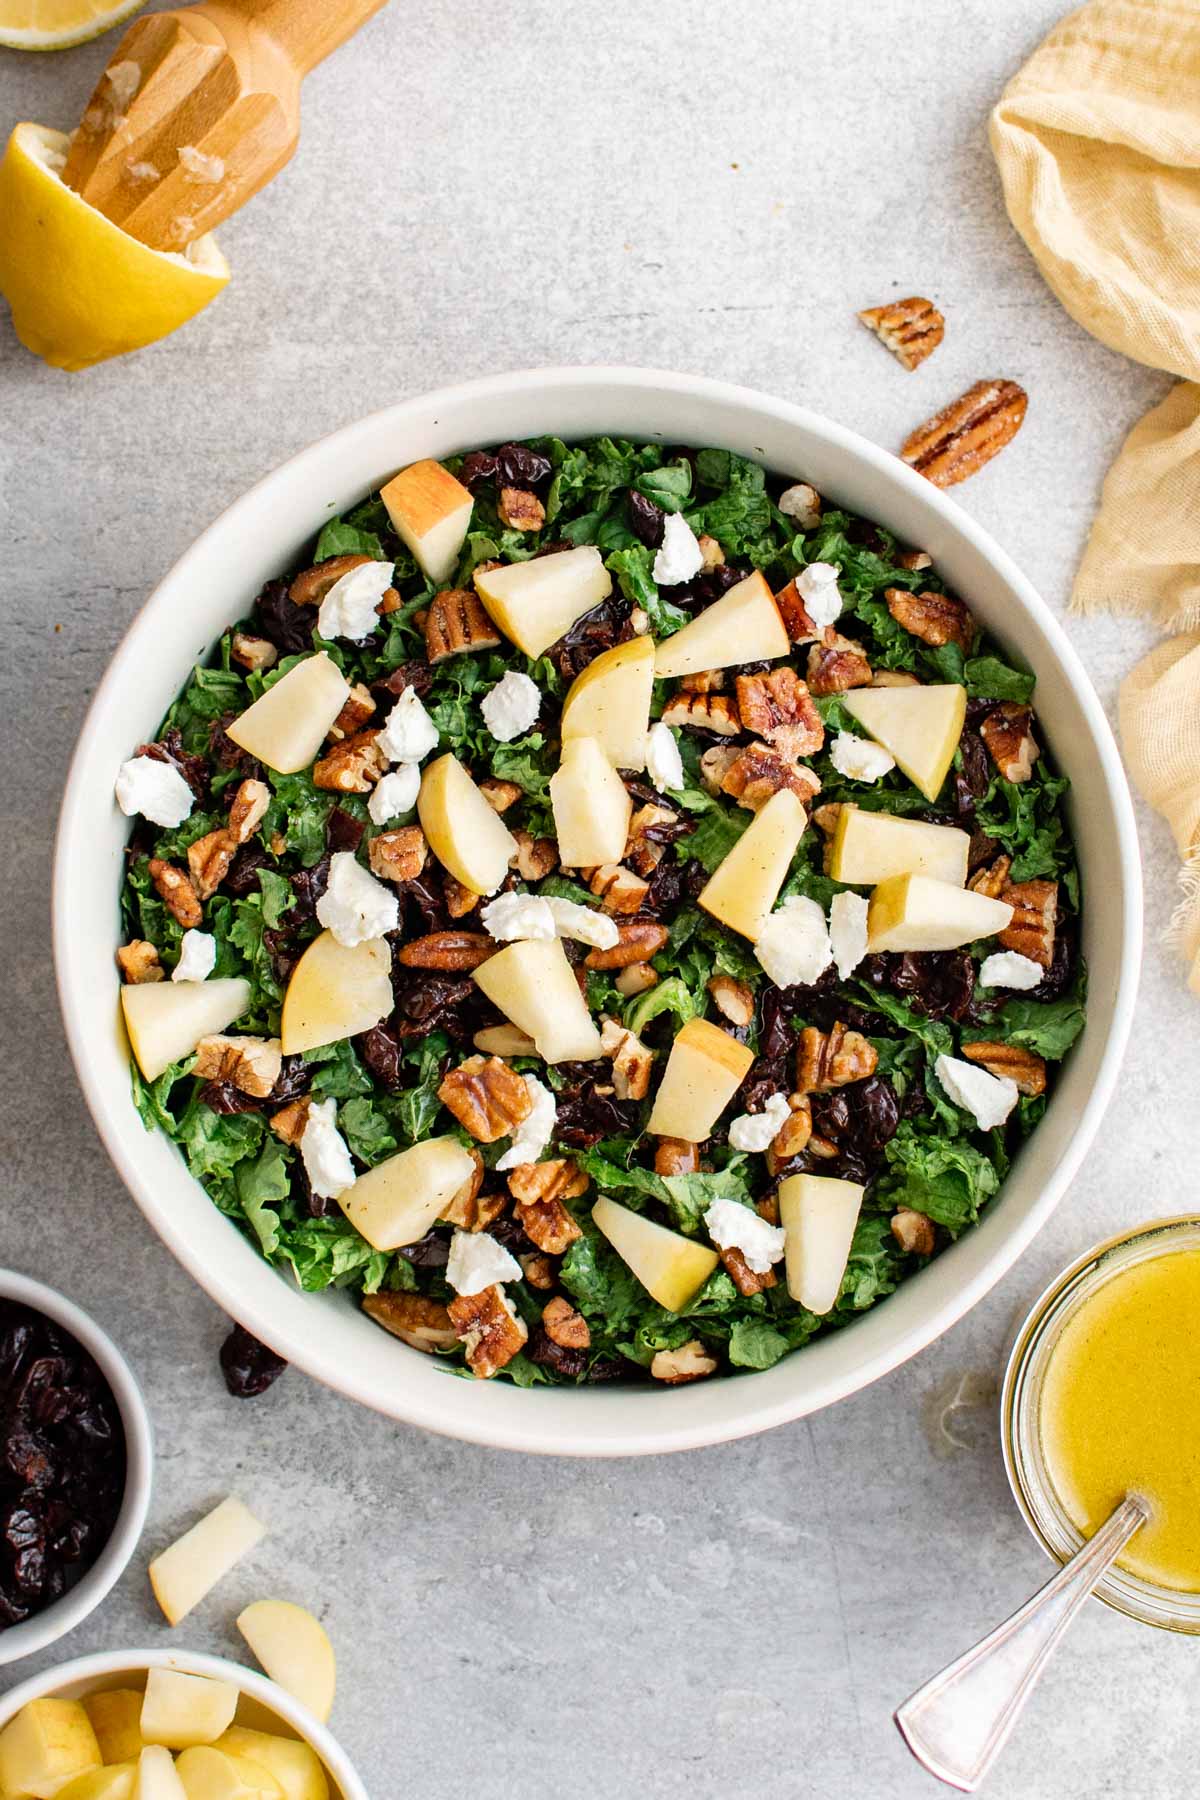 Kale Salad with apples, pecans, cherries and goat cheese.